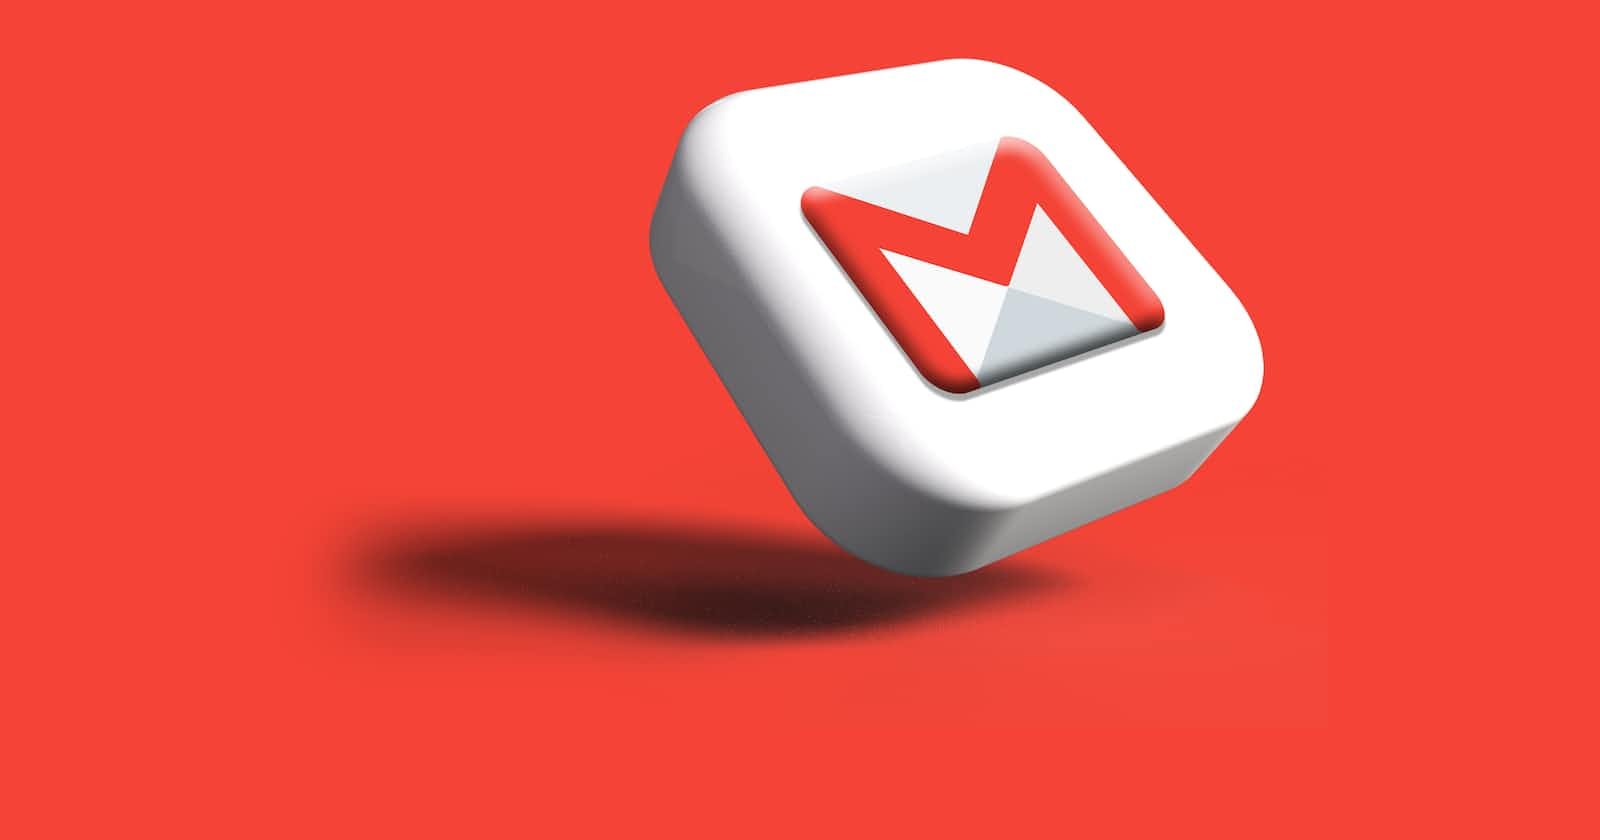 How to install and send an email using Gmail app on IOS